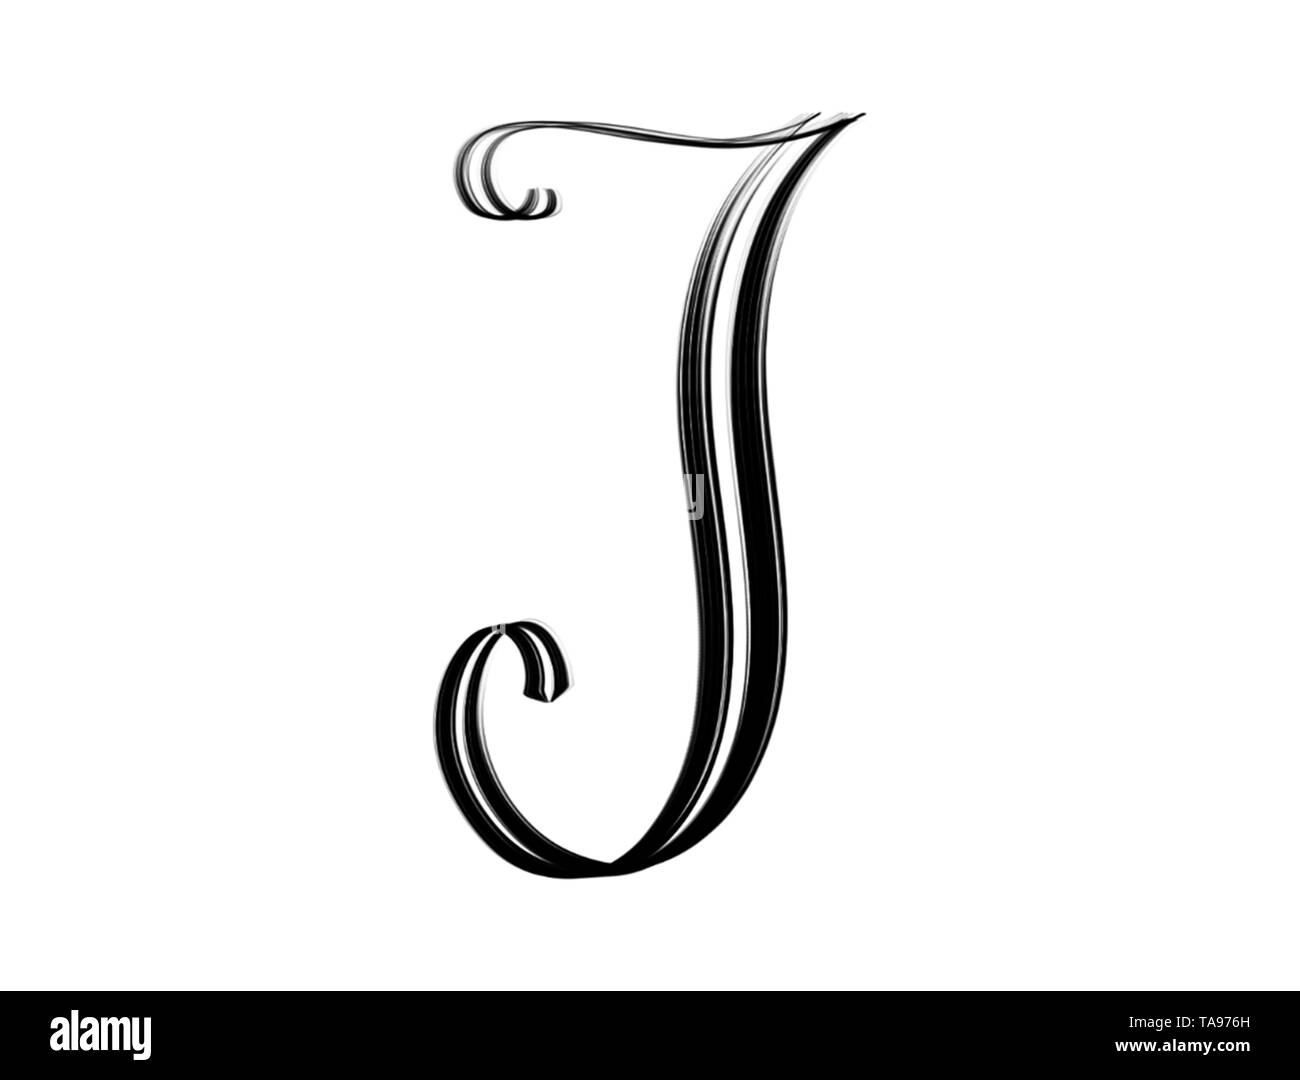 J - capital script letter in black isolated on white background Stock Photo